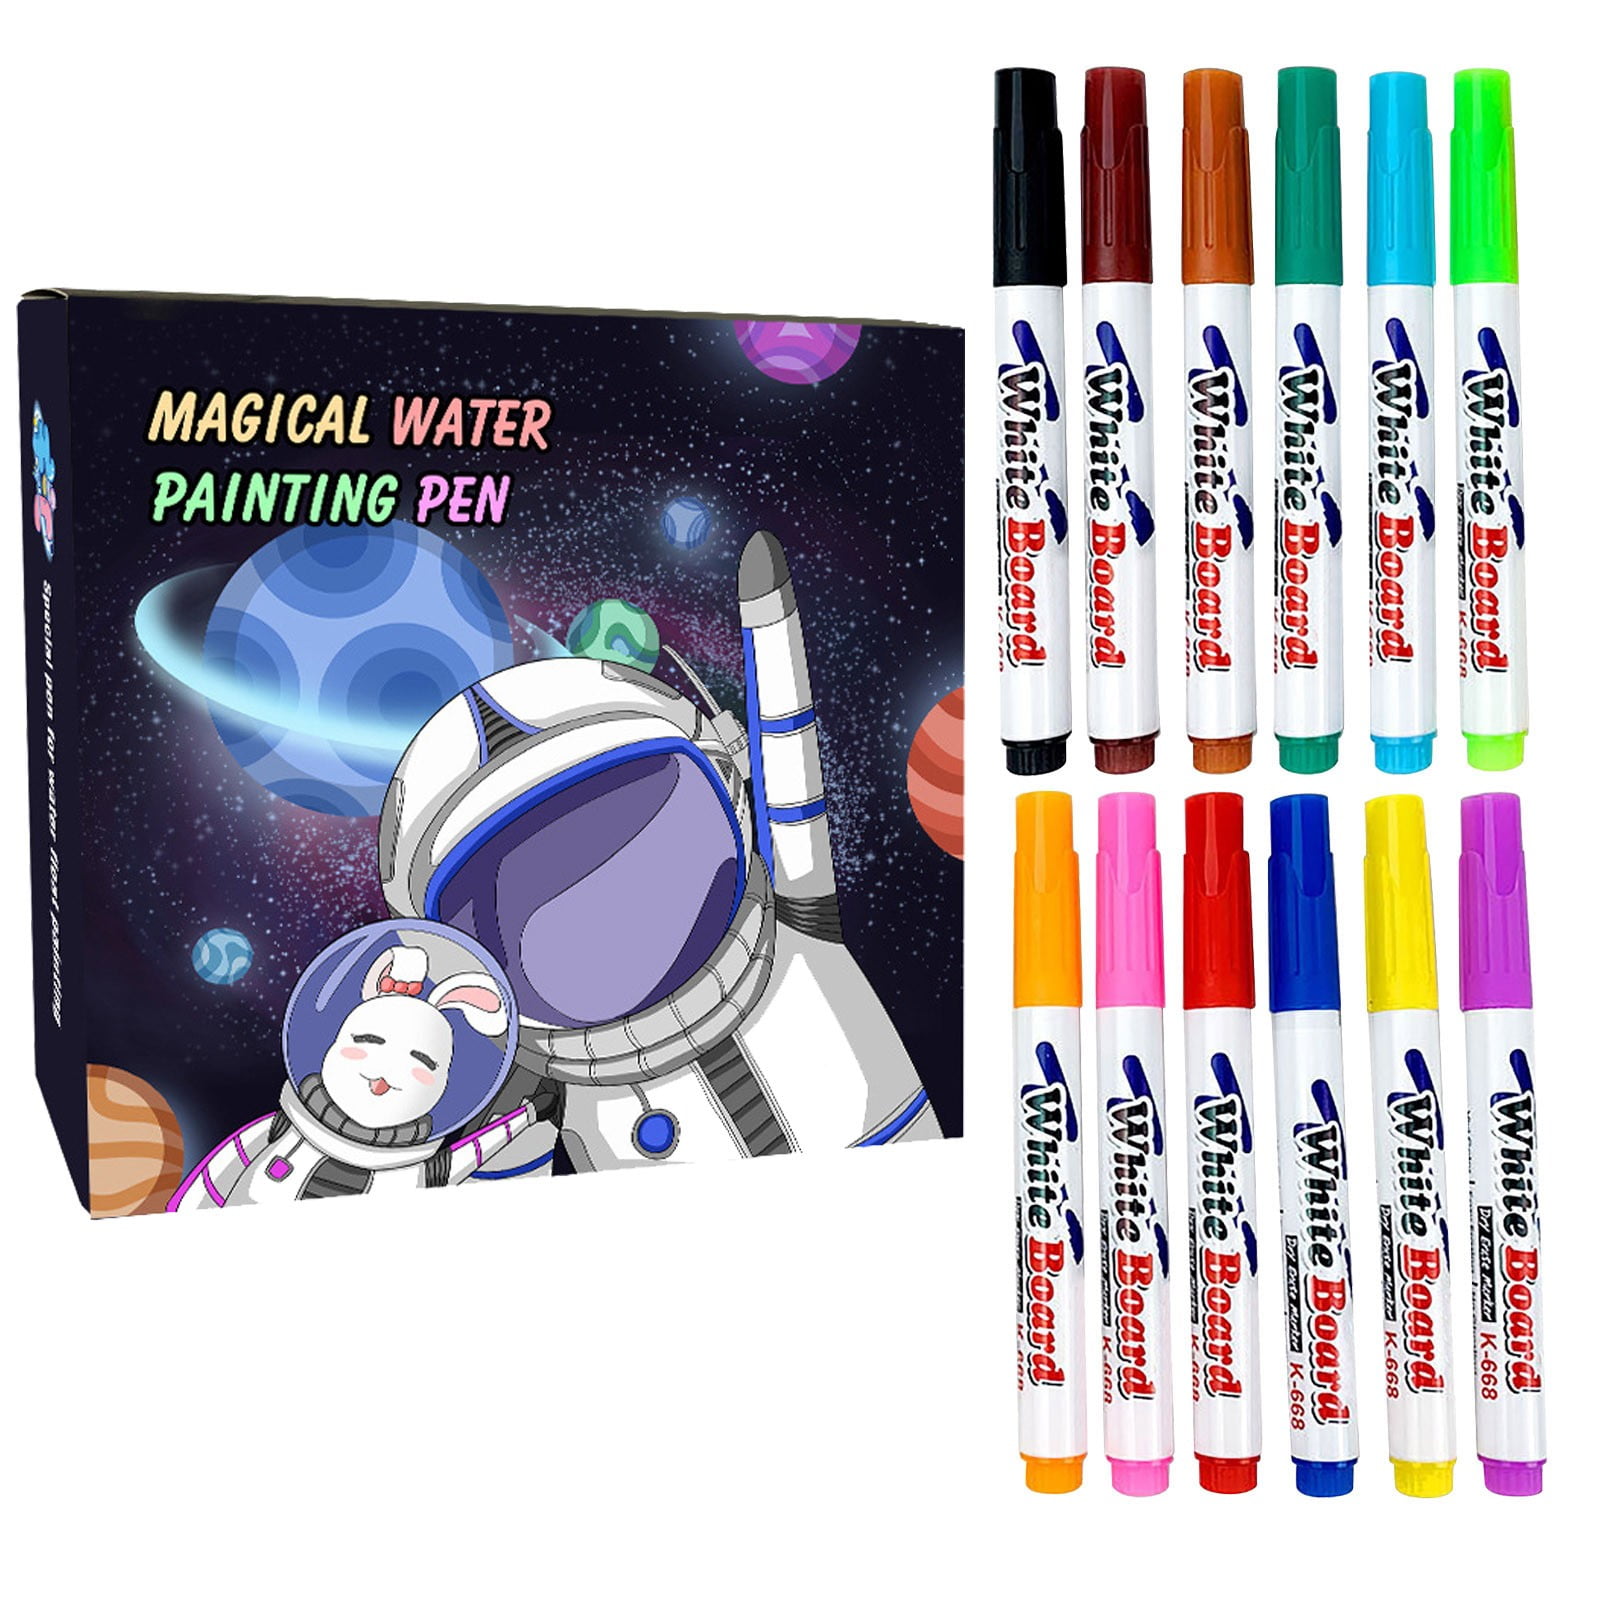 Kids Watercolor Set, Magic Floating Ink Pens, Dry Erase Whiteboard Markers, Includes 12 Drawing Pens, 1 Ceramic Spoon,Magic Watercolour Pens Set for